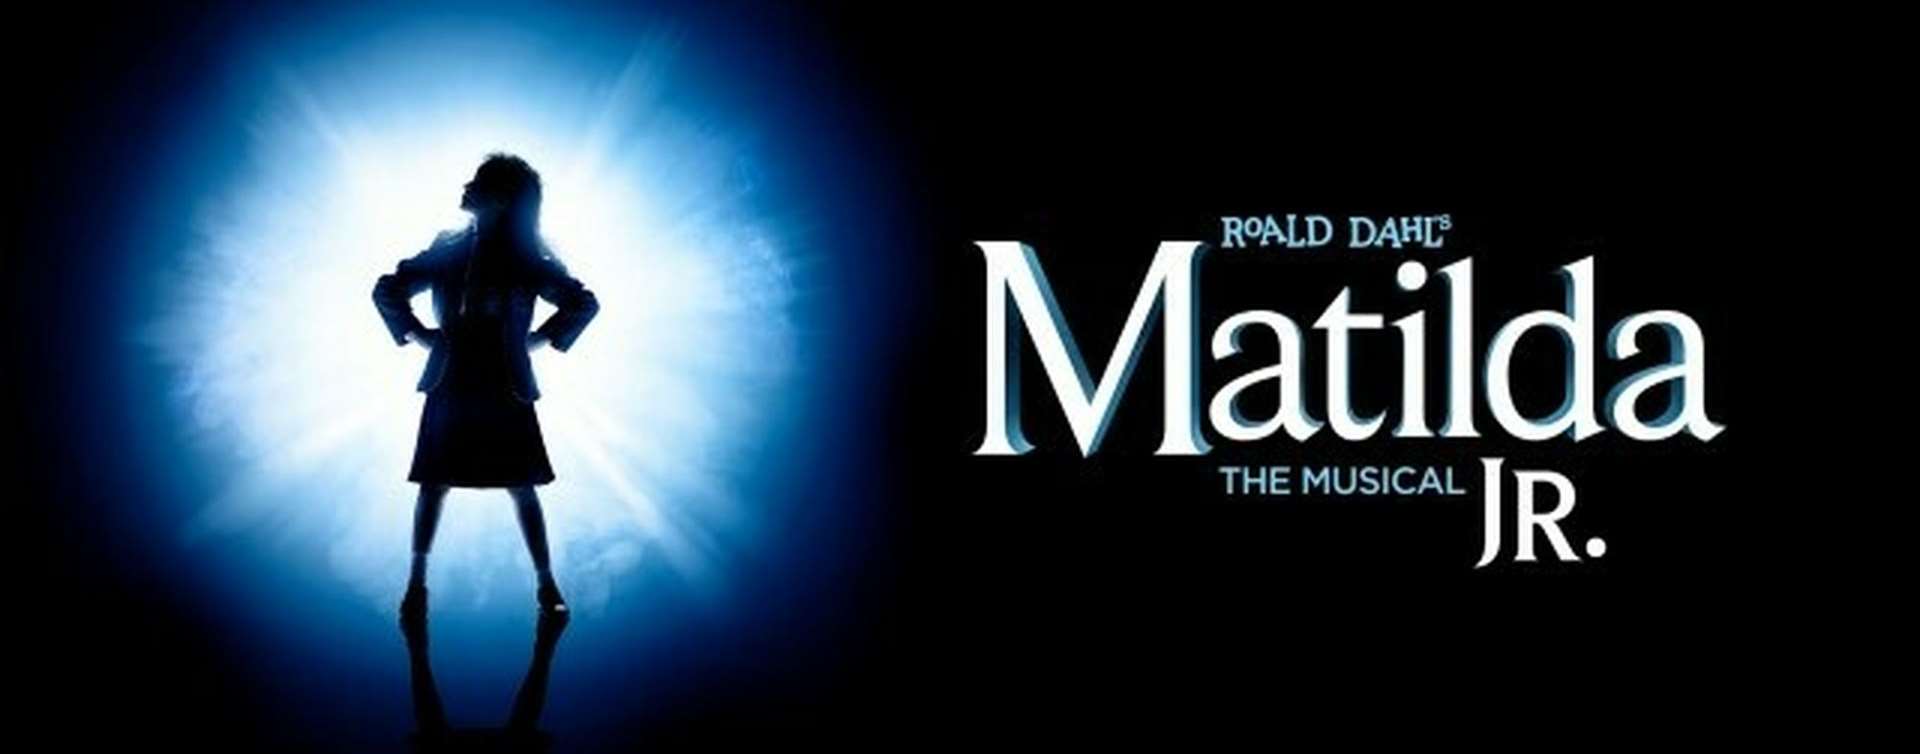 Matilda The Musical performed by local youngsters.